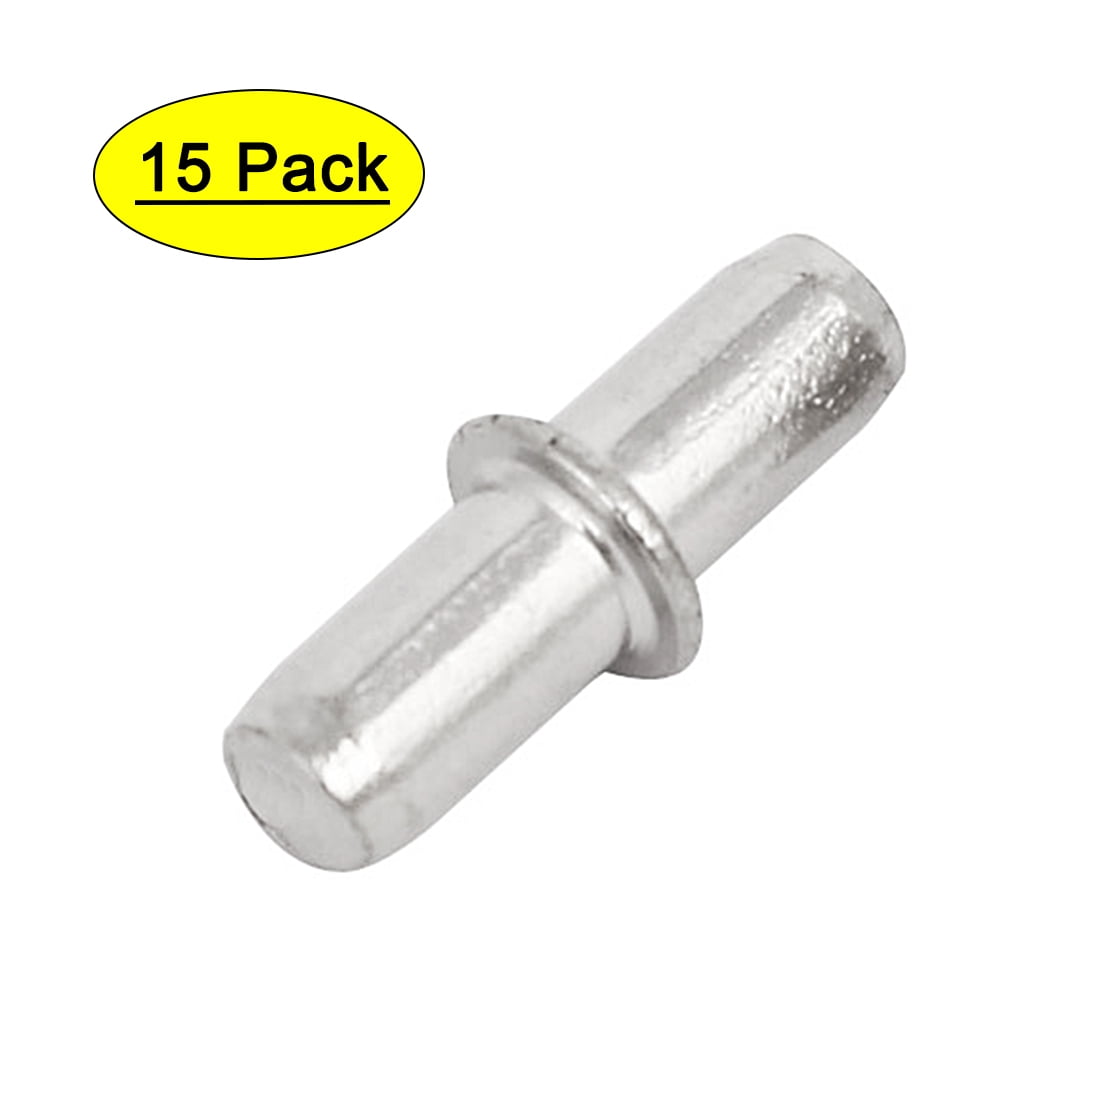 12 x STRONG 4,5,7mm METAL SHELF SUPPORTS PLUG IN STUD PINS PEGS CABINET CUPBOARD 